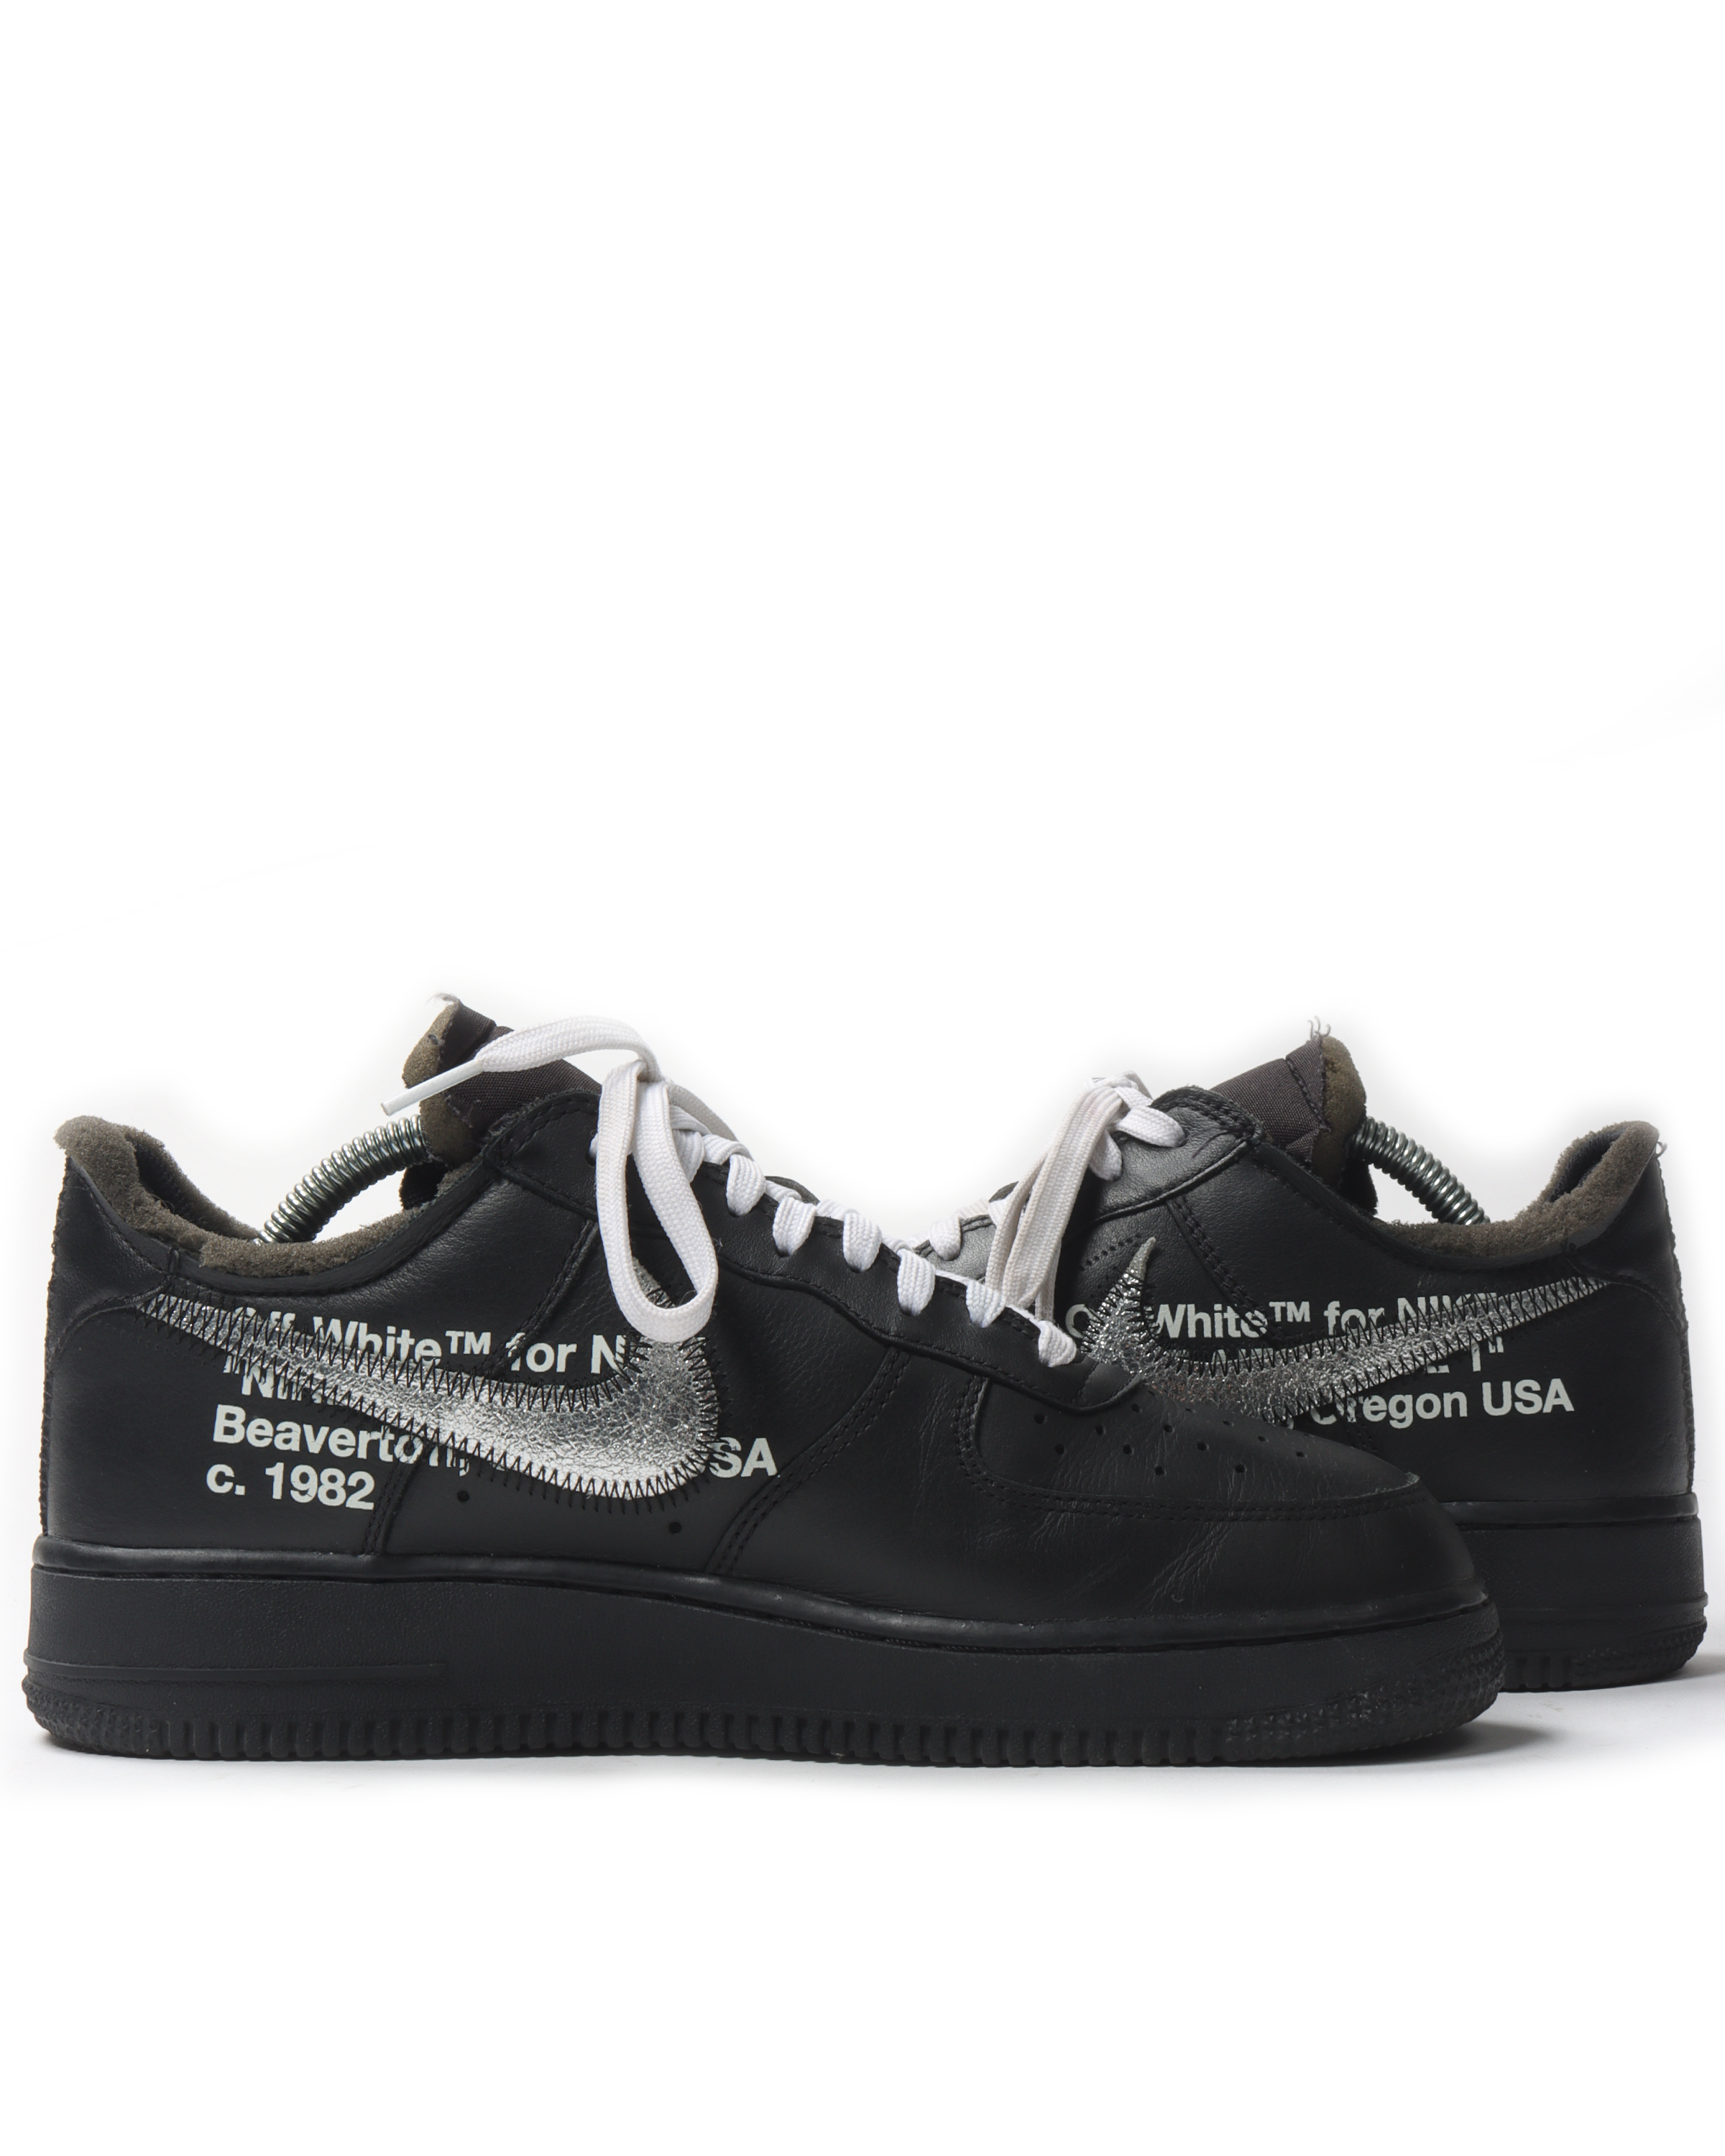 Off-White x Nike Air Force 1 MoMA